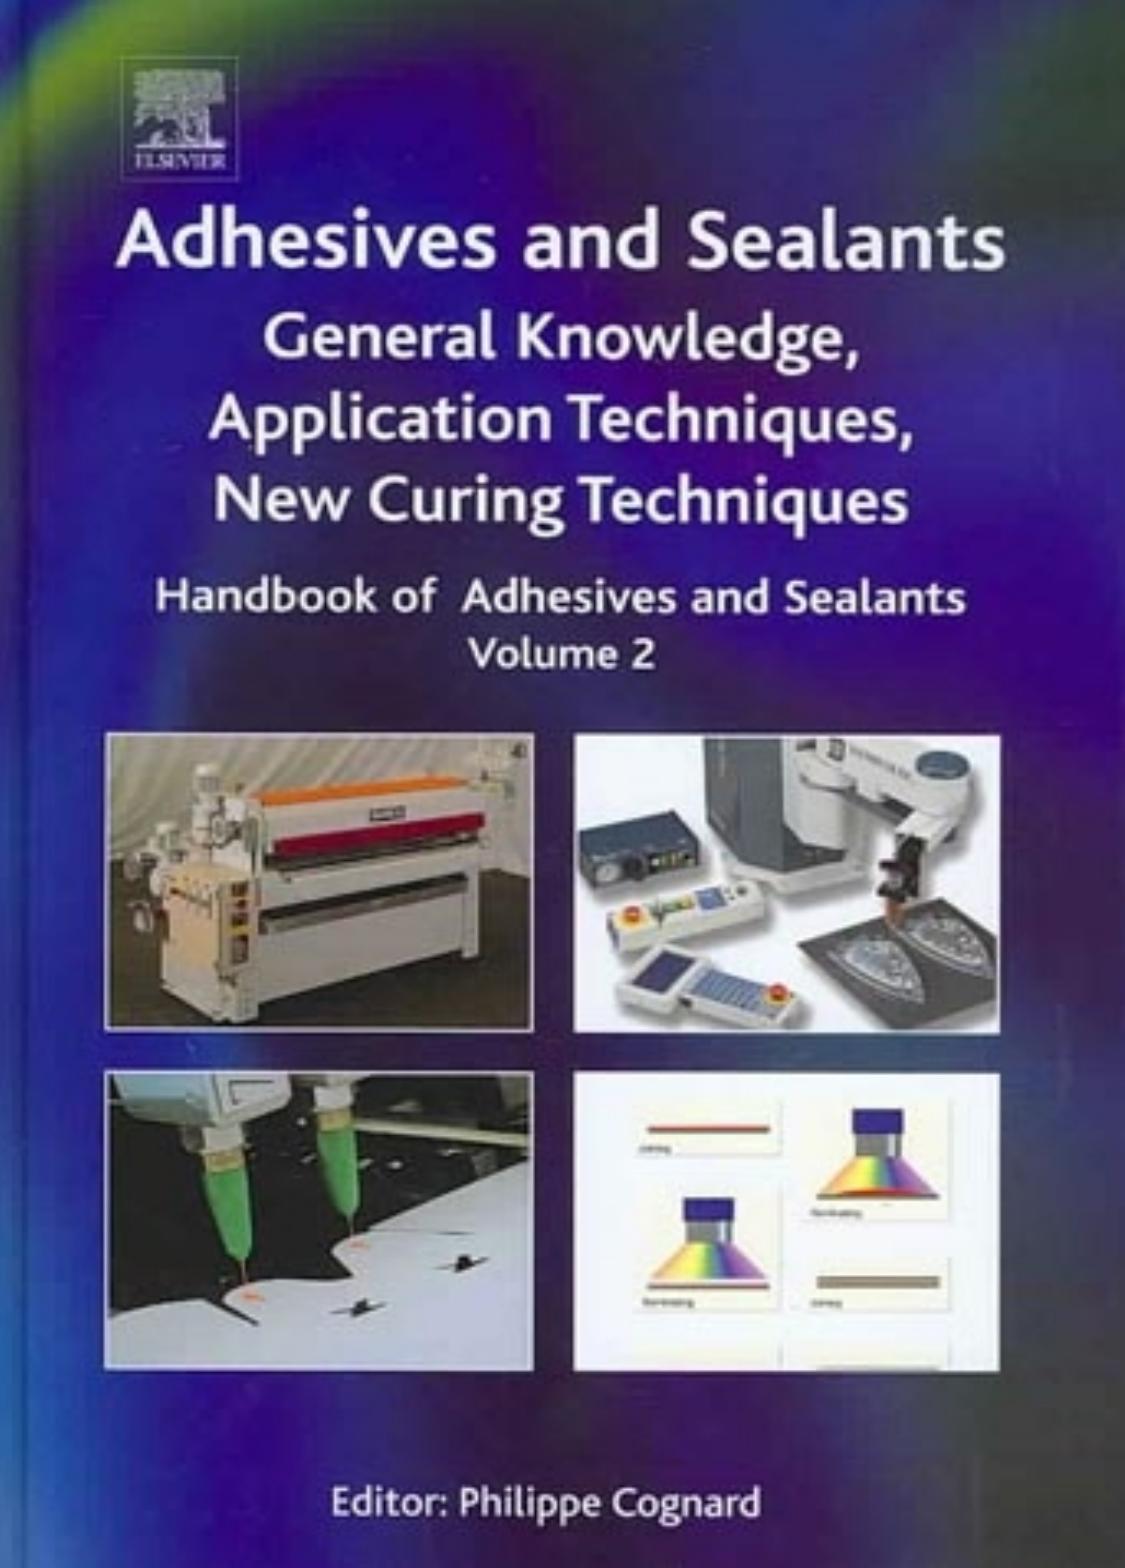 Handbook of Adhesives and Sealants : General Knowledge, Application of Adhesives, New Curing Techniques